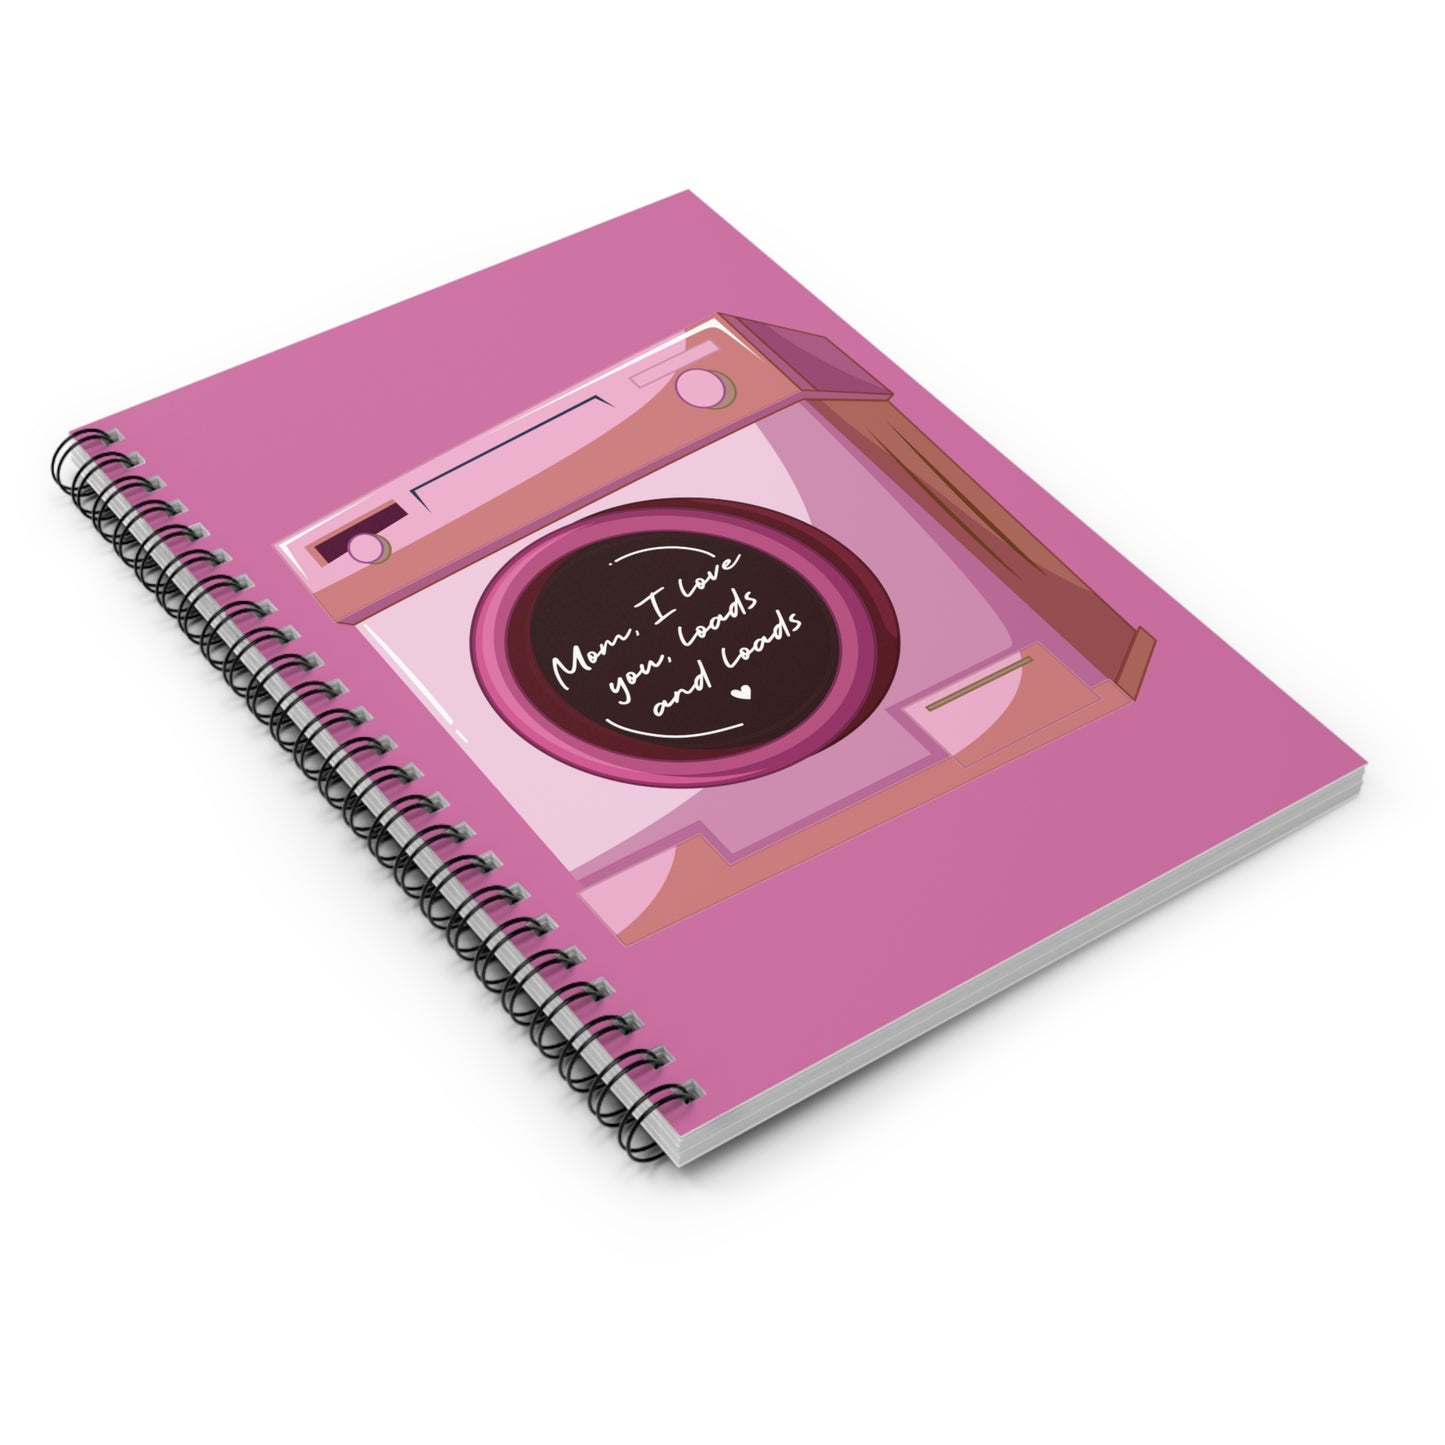 Loads of Love Spiral Notebook - Ruled Line